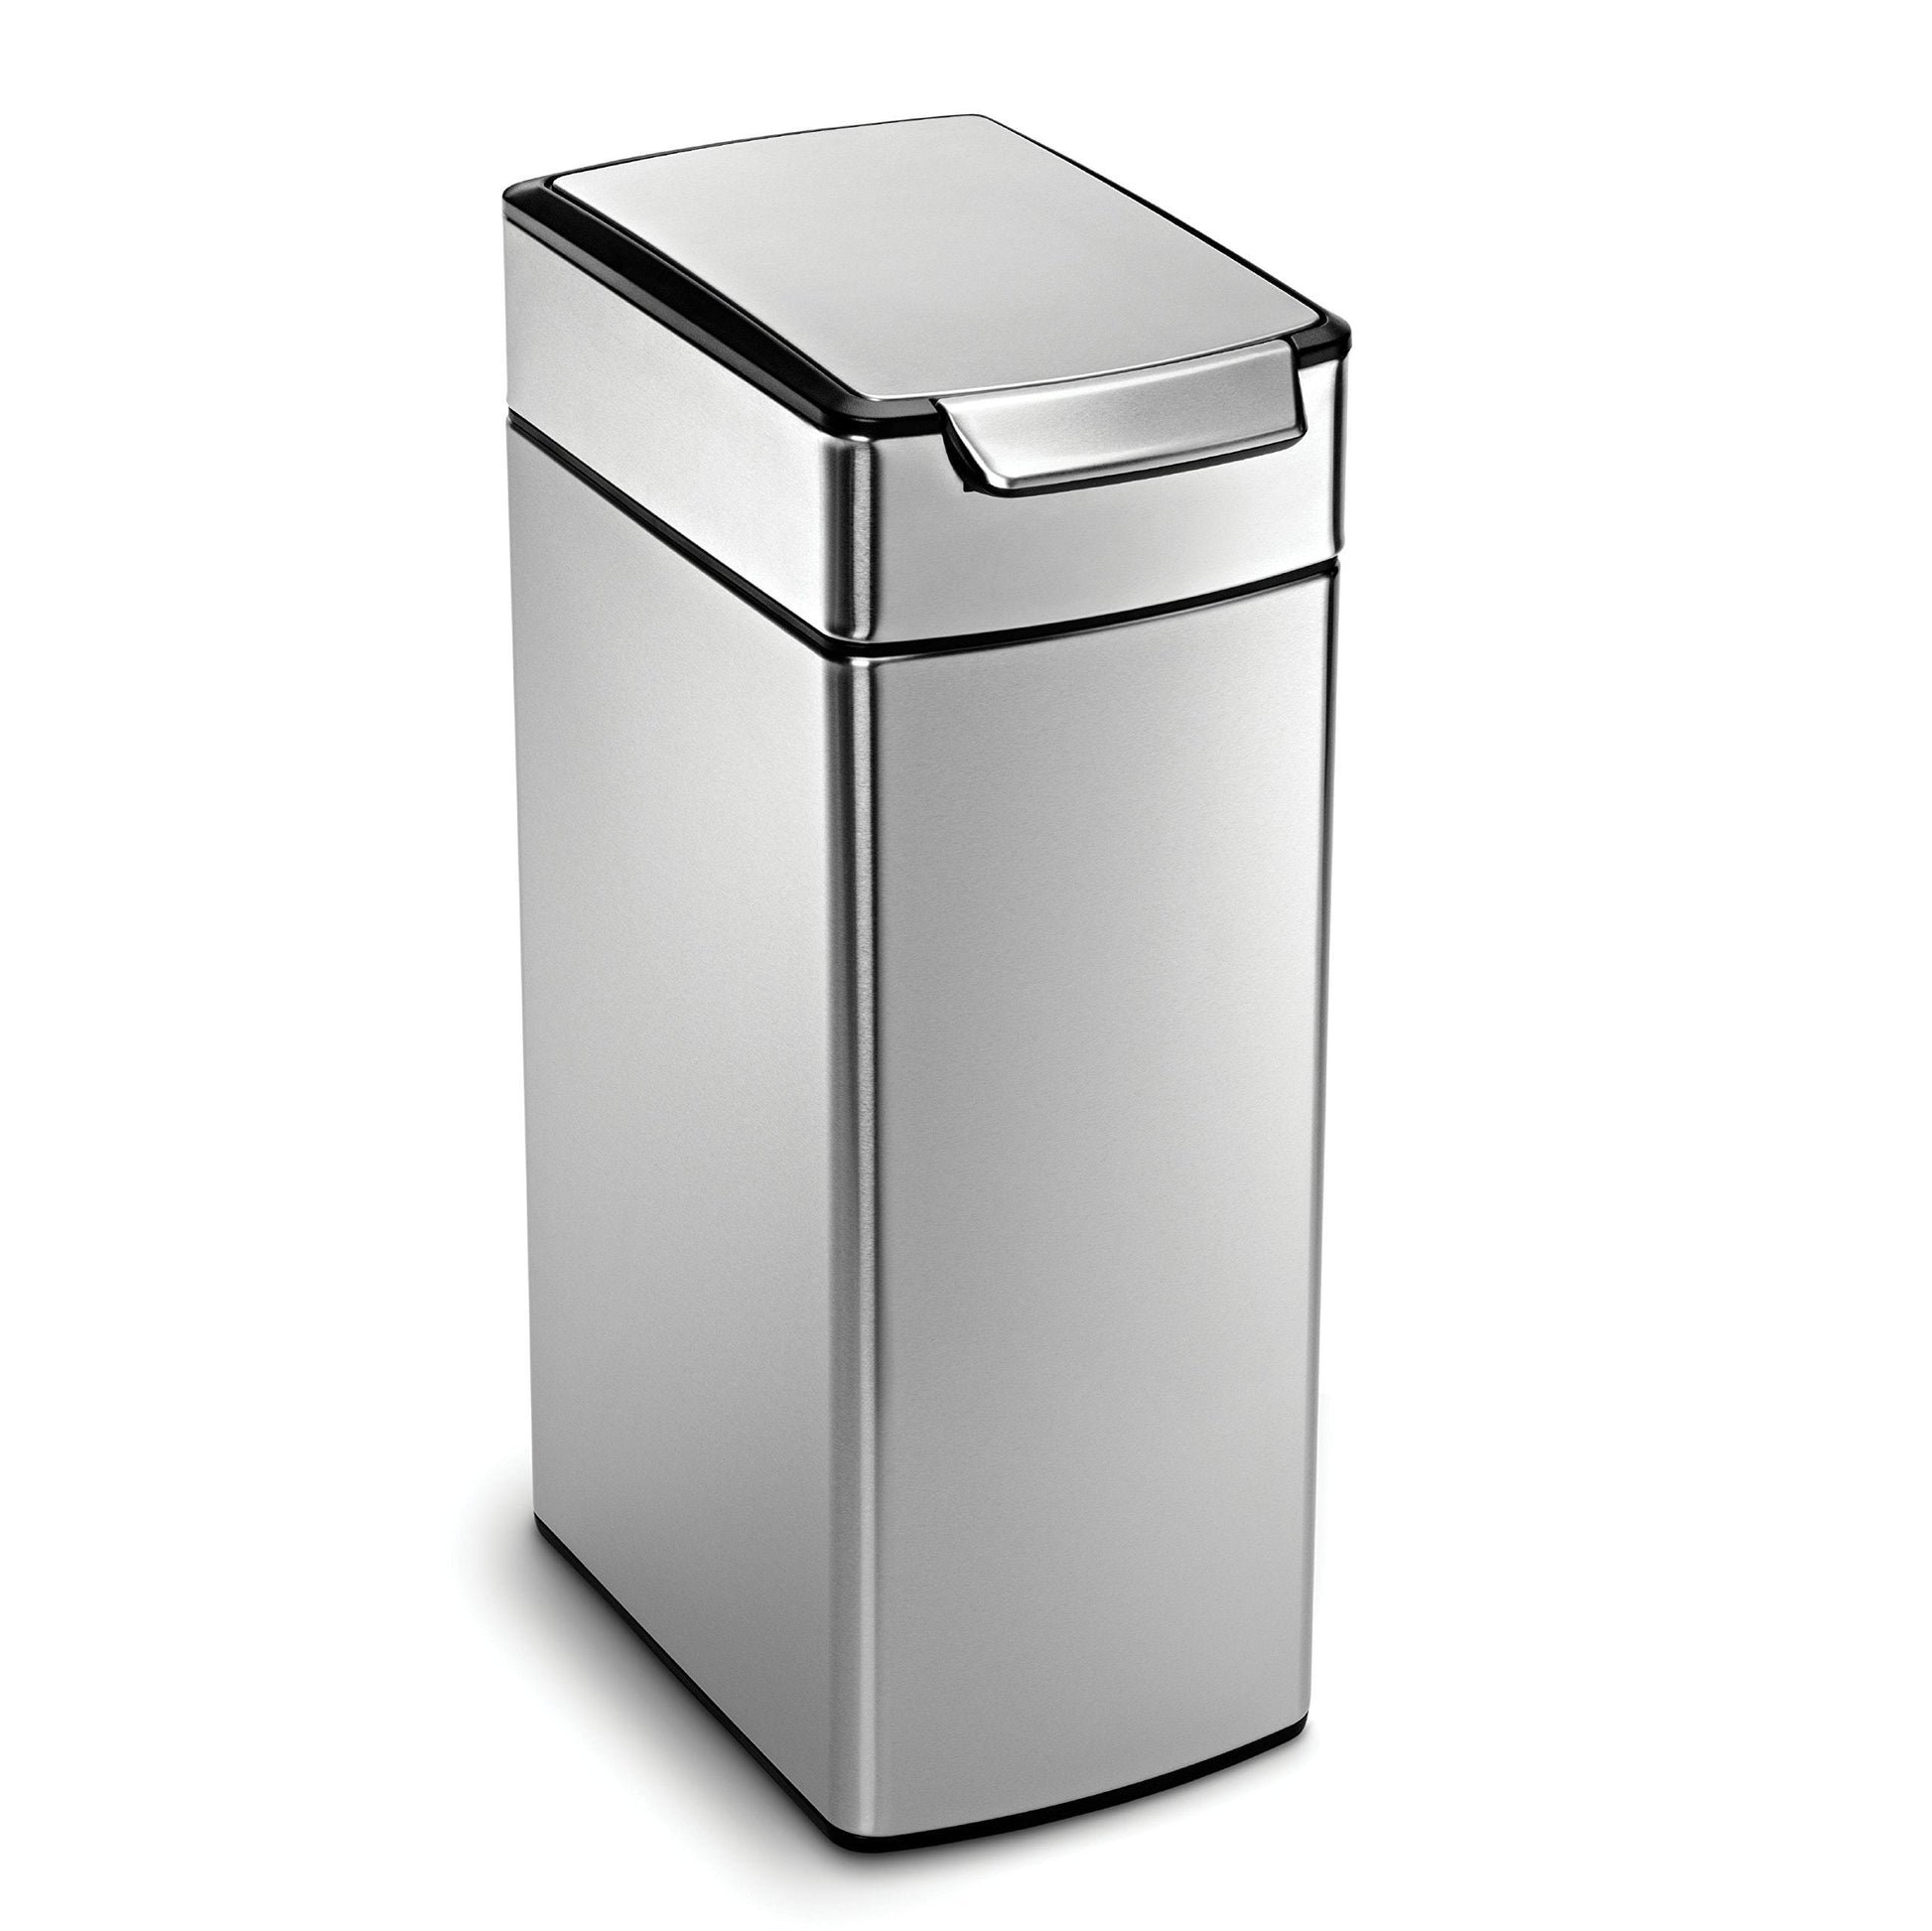 Discover the best simplehuman 40 liter 10 6 gallon stainless steel slim touch bar kitchen trash can brushed stainless steel